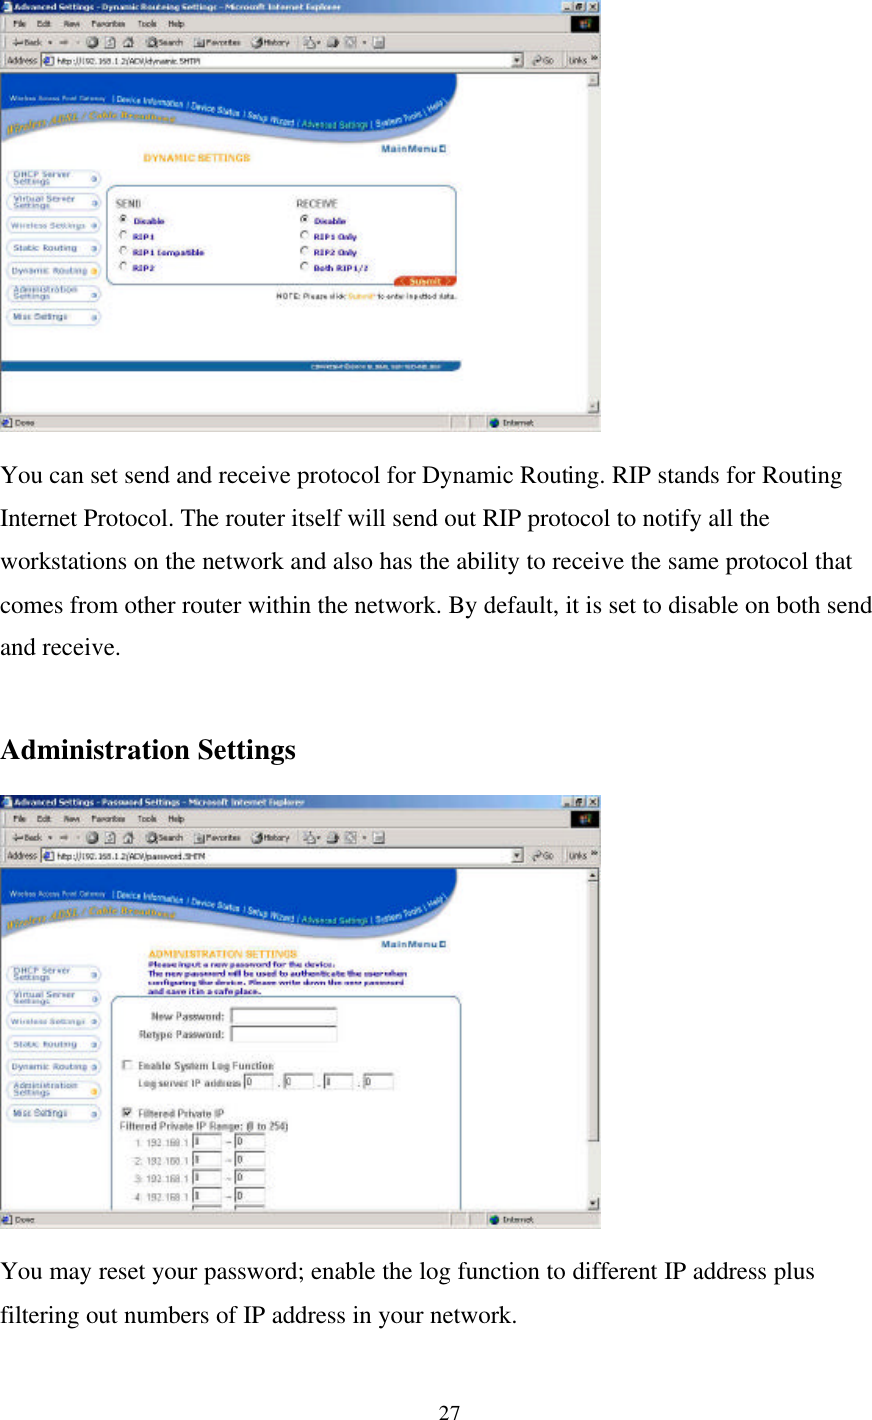 27You can set send and receive protocol for Dynamic Routing. RIP stands for RoutingInternet Protocol. The router itself will send out RIP protocol to notify all theworkstations on the network and also has the ability to receive the same protocol thatcomes from other router within the network. By default, it is set to disable on both sendand receive.Administration SettingsYou may reset your password; enable the log function to different IP address plusfiltering out numbers of IP address in your network.